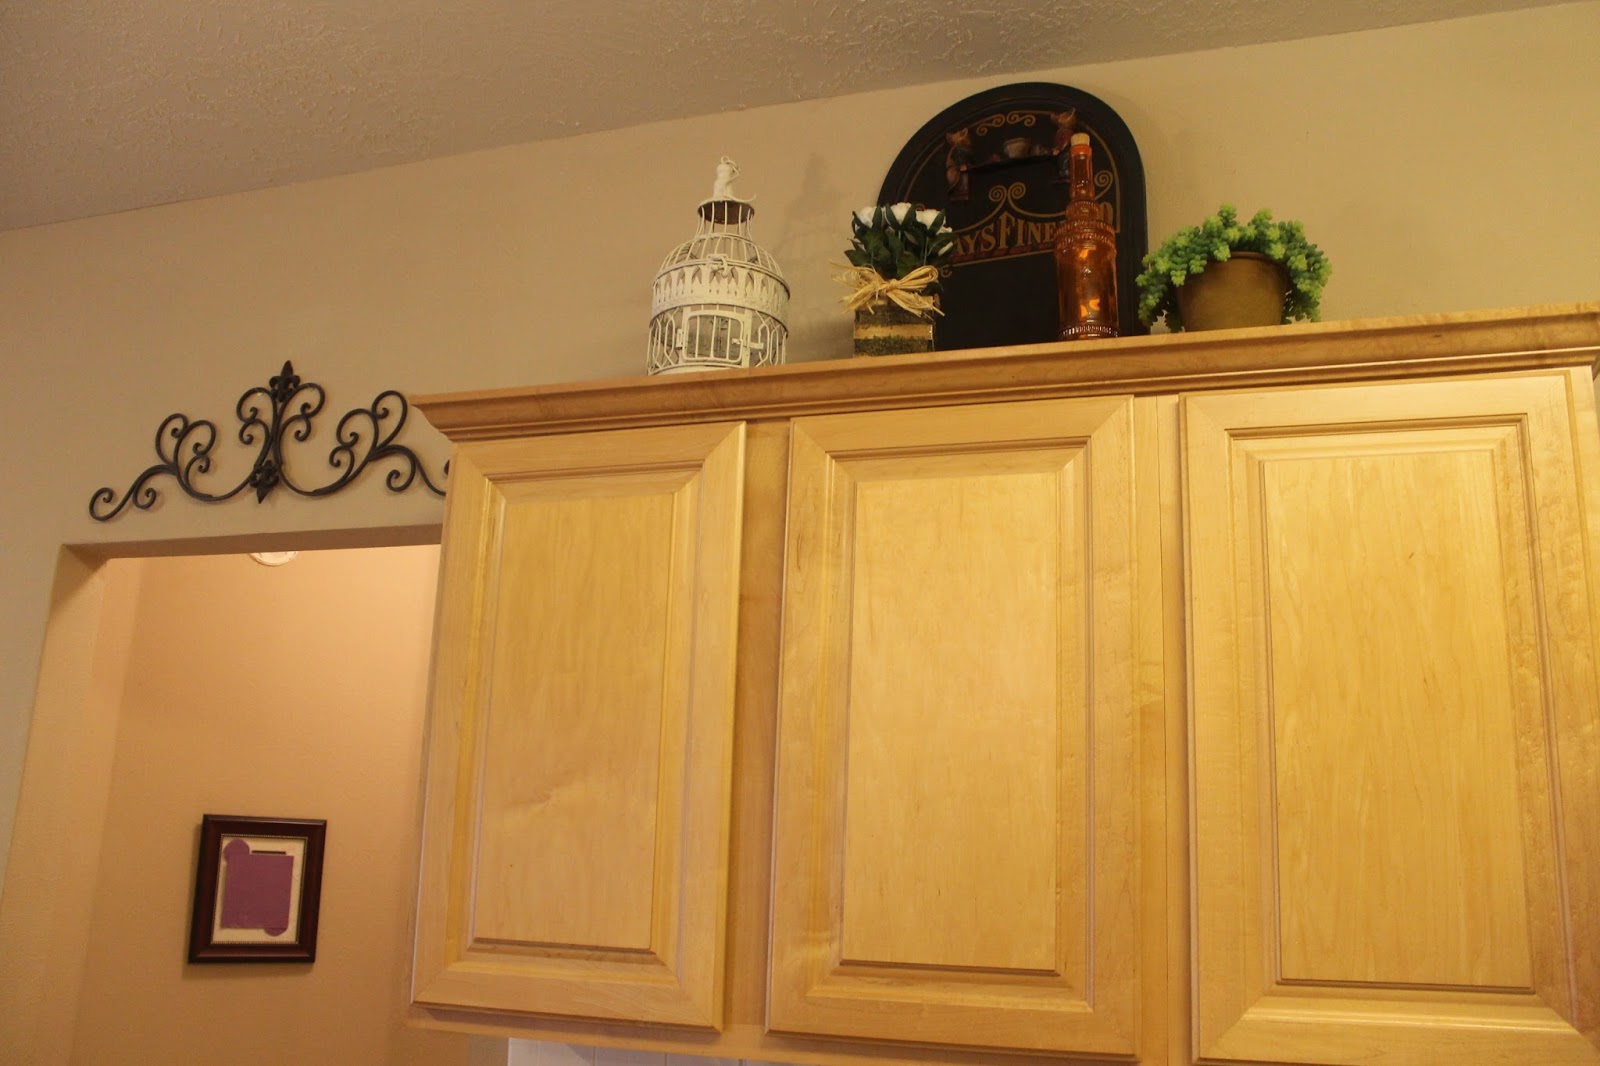 Texas Decor: Rearranging the Tops of My Kitchen Cabinets